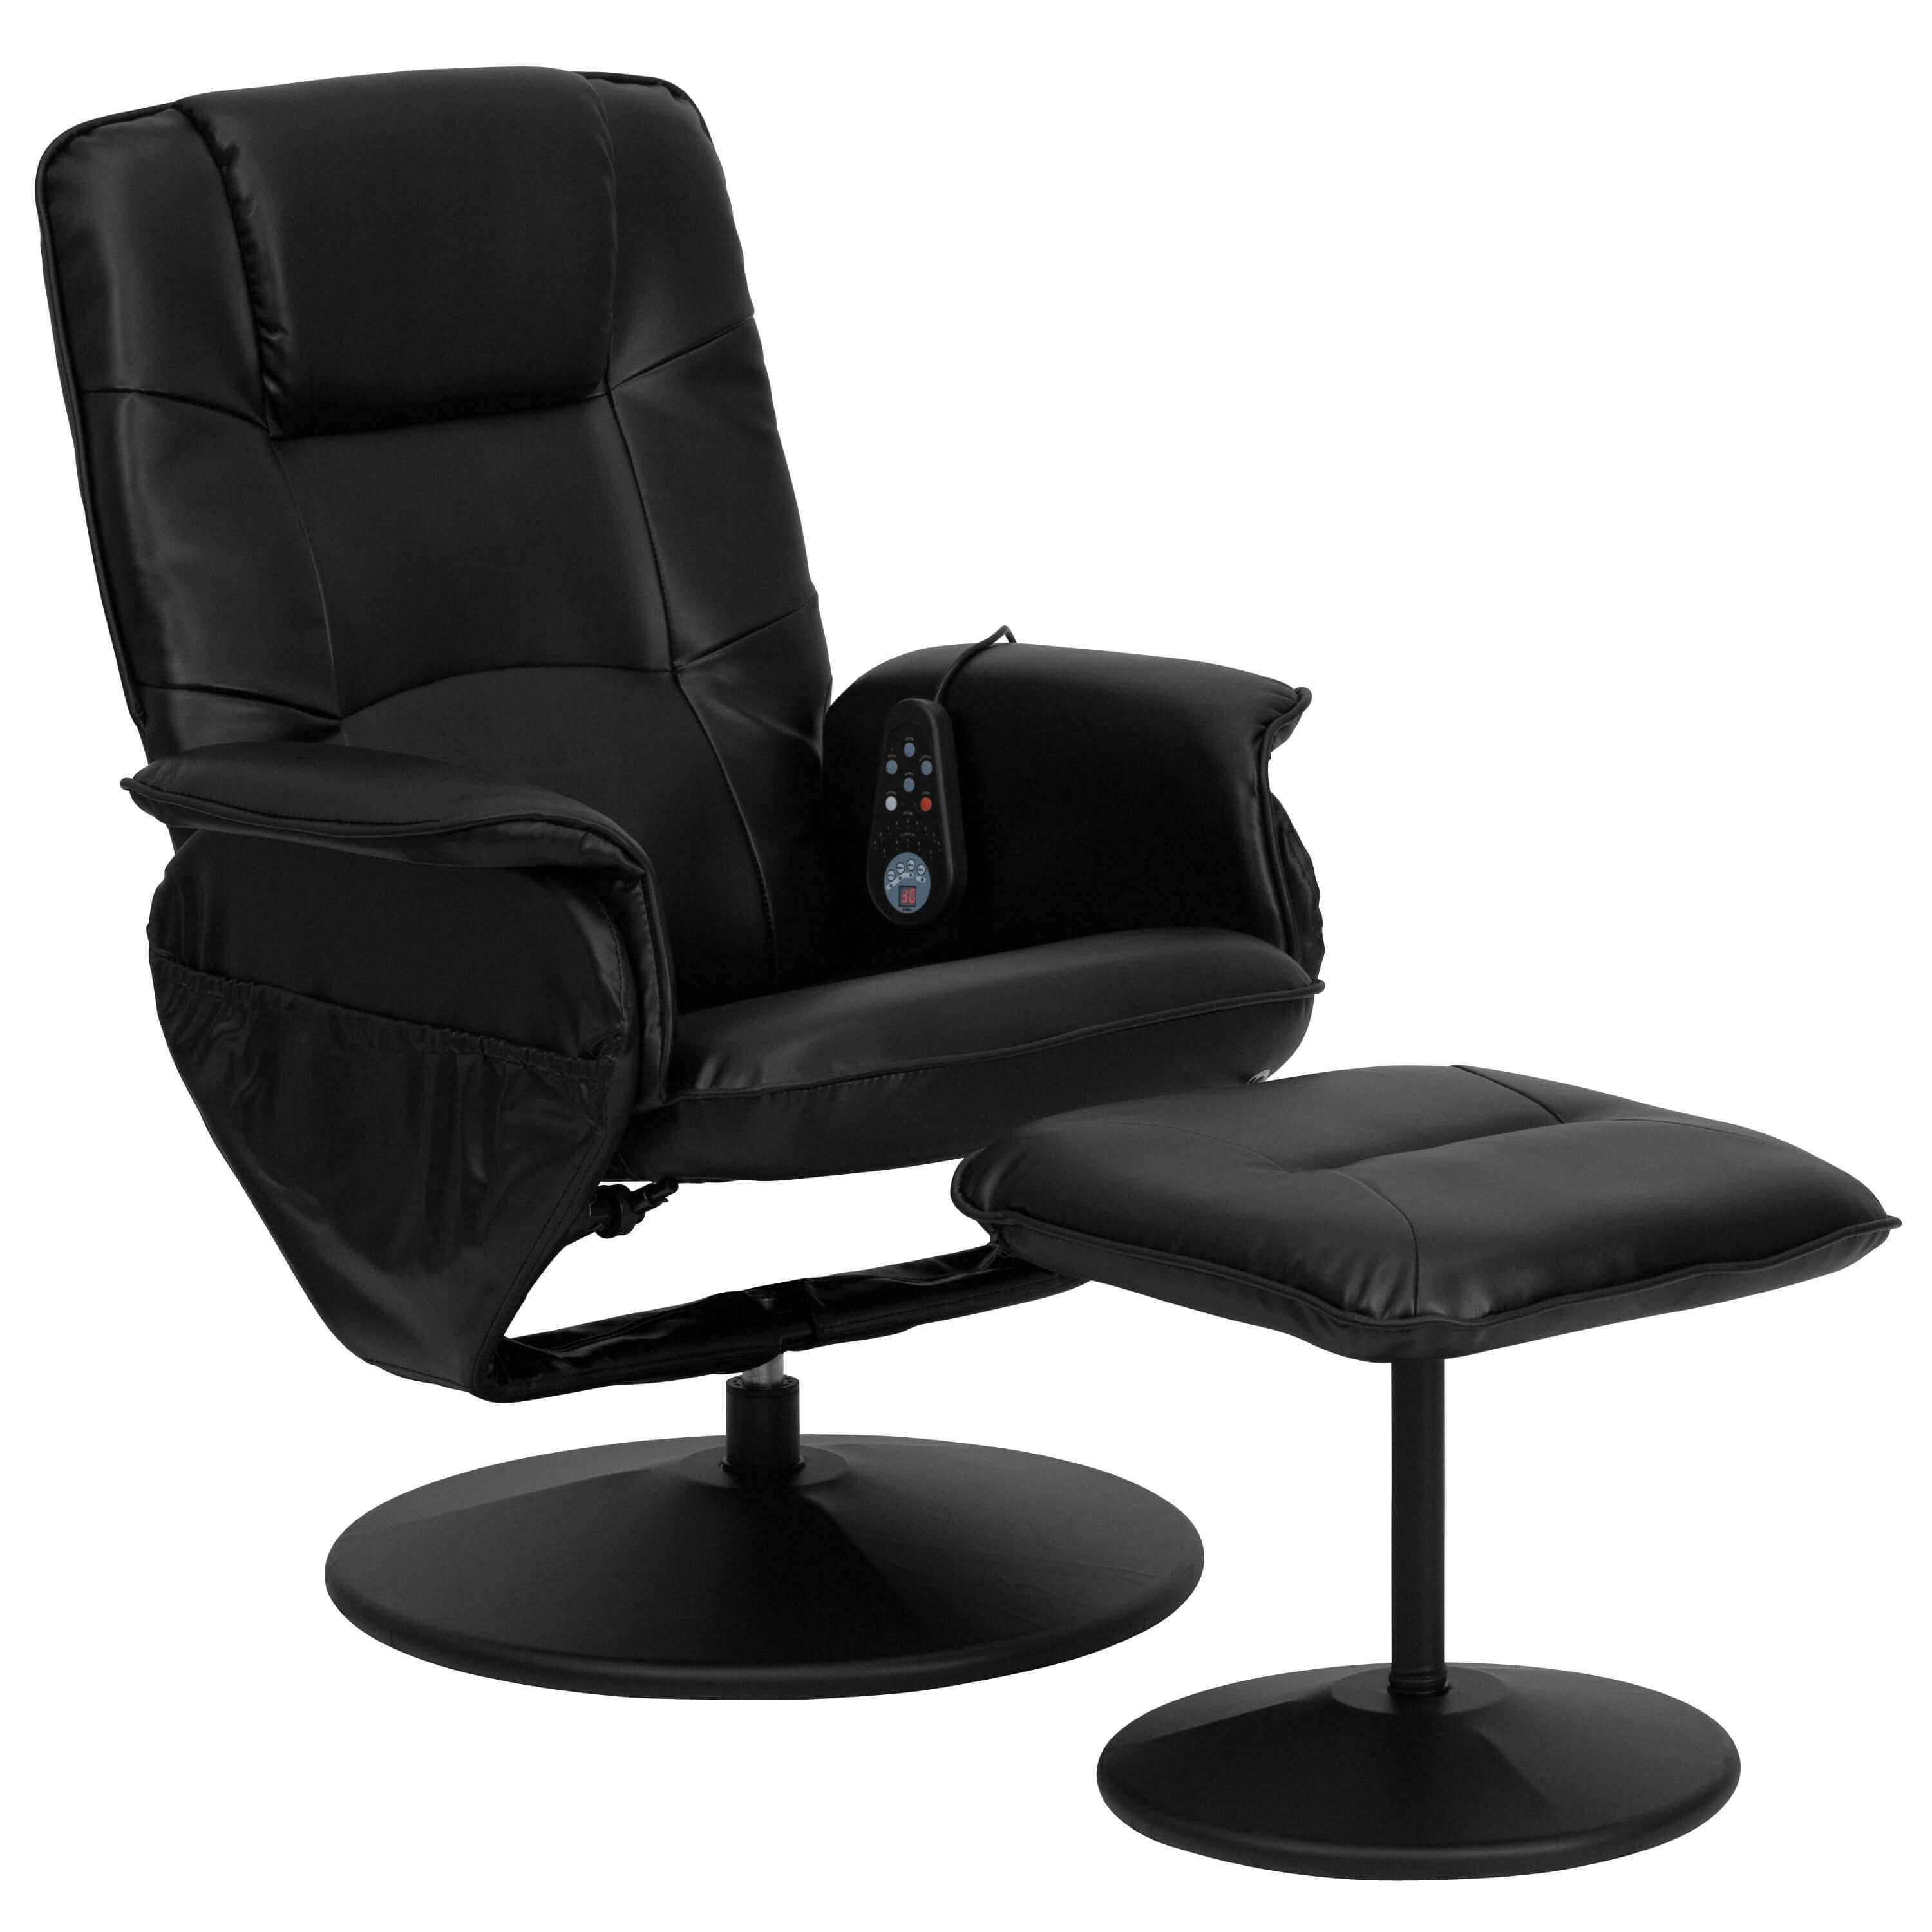 contemporary-recliners-recliner-chair-with-massage.jpg